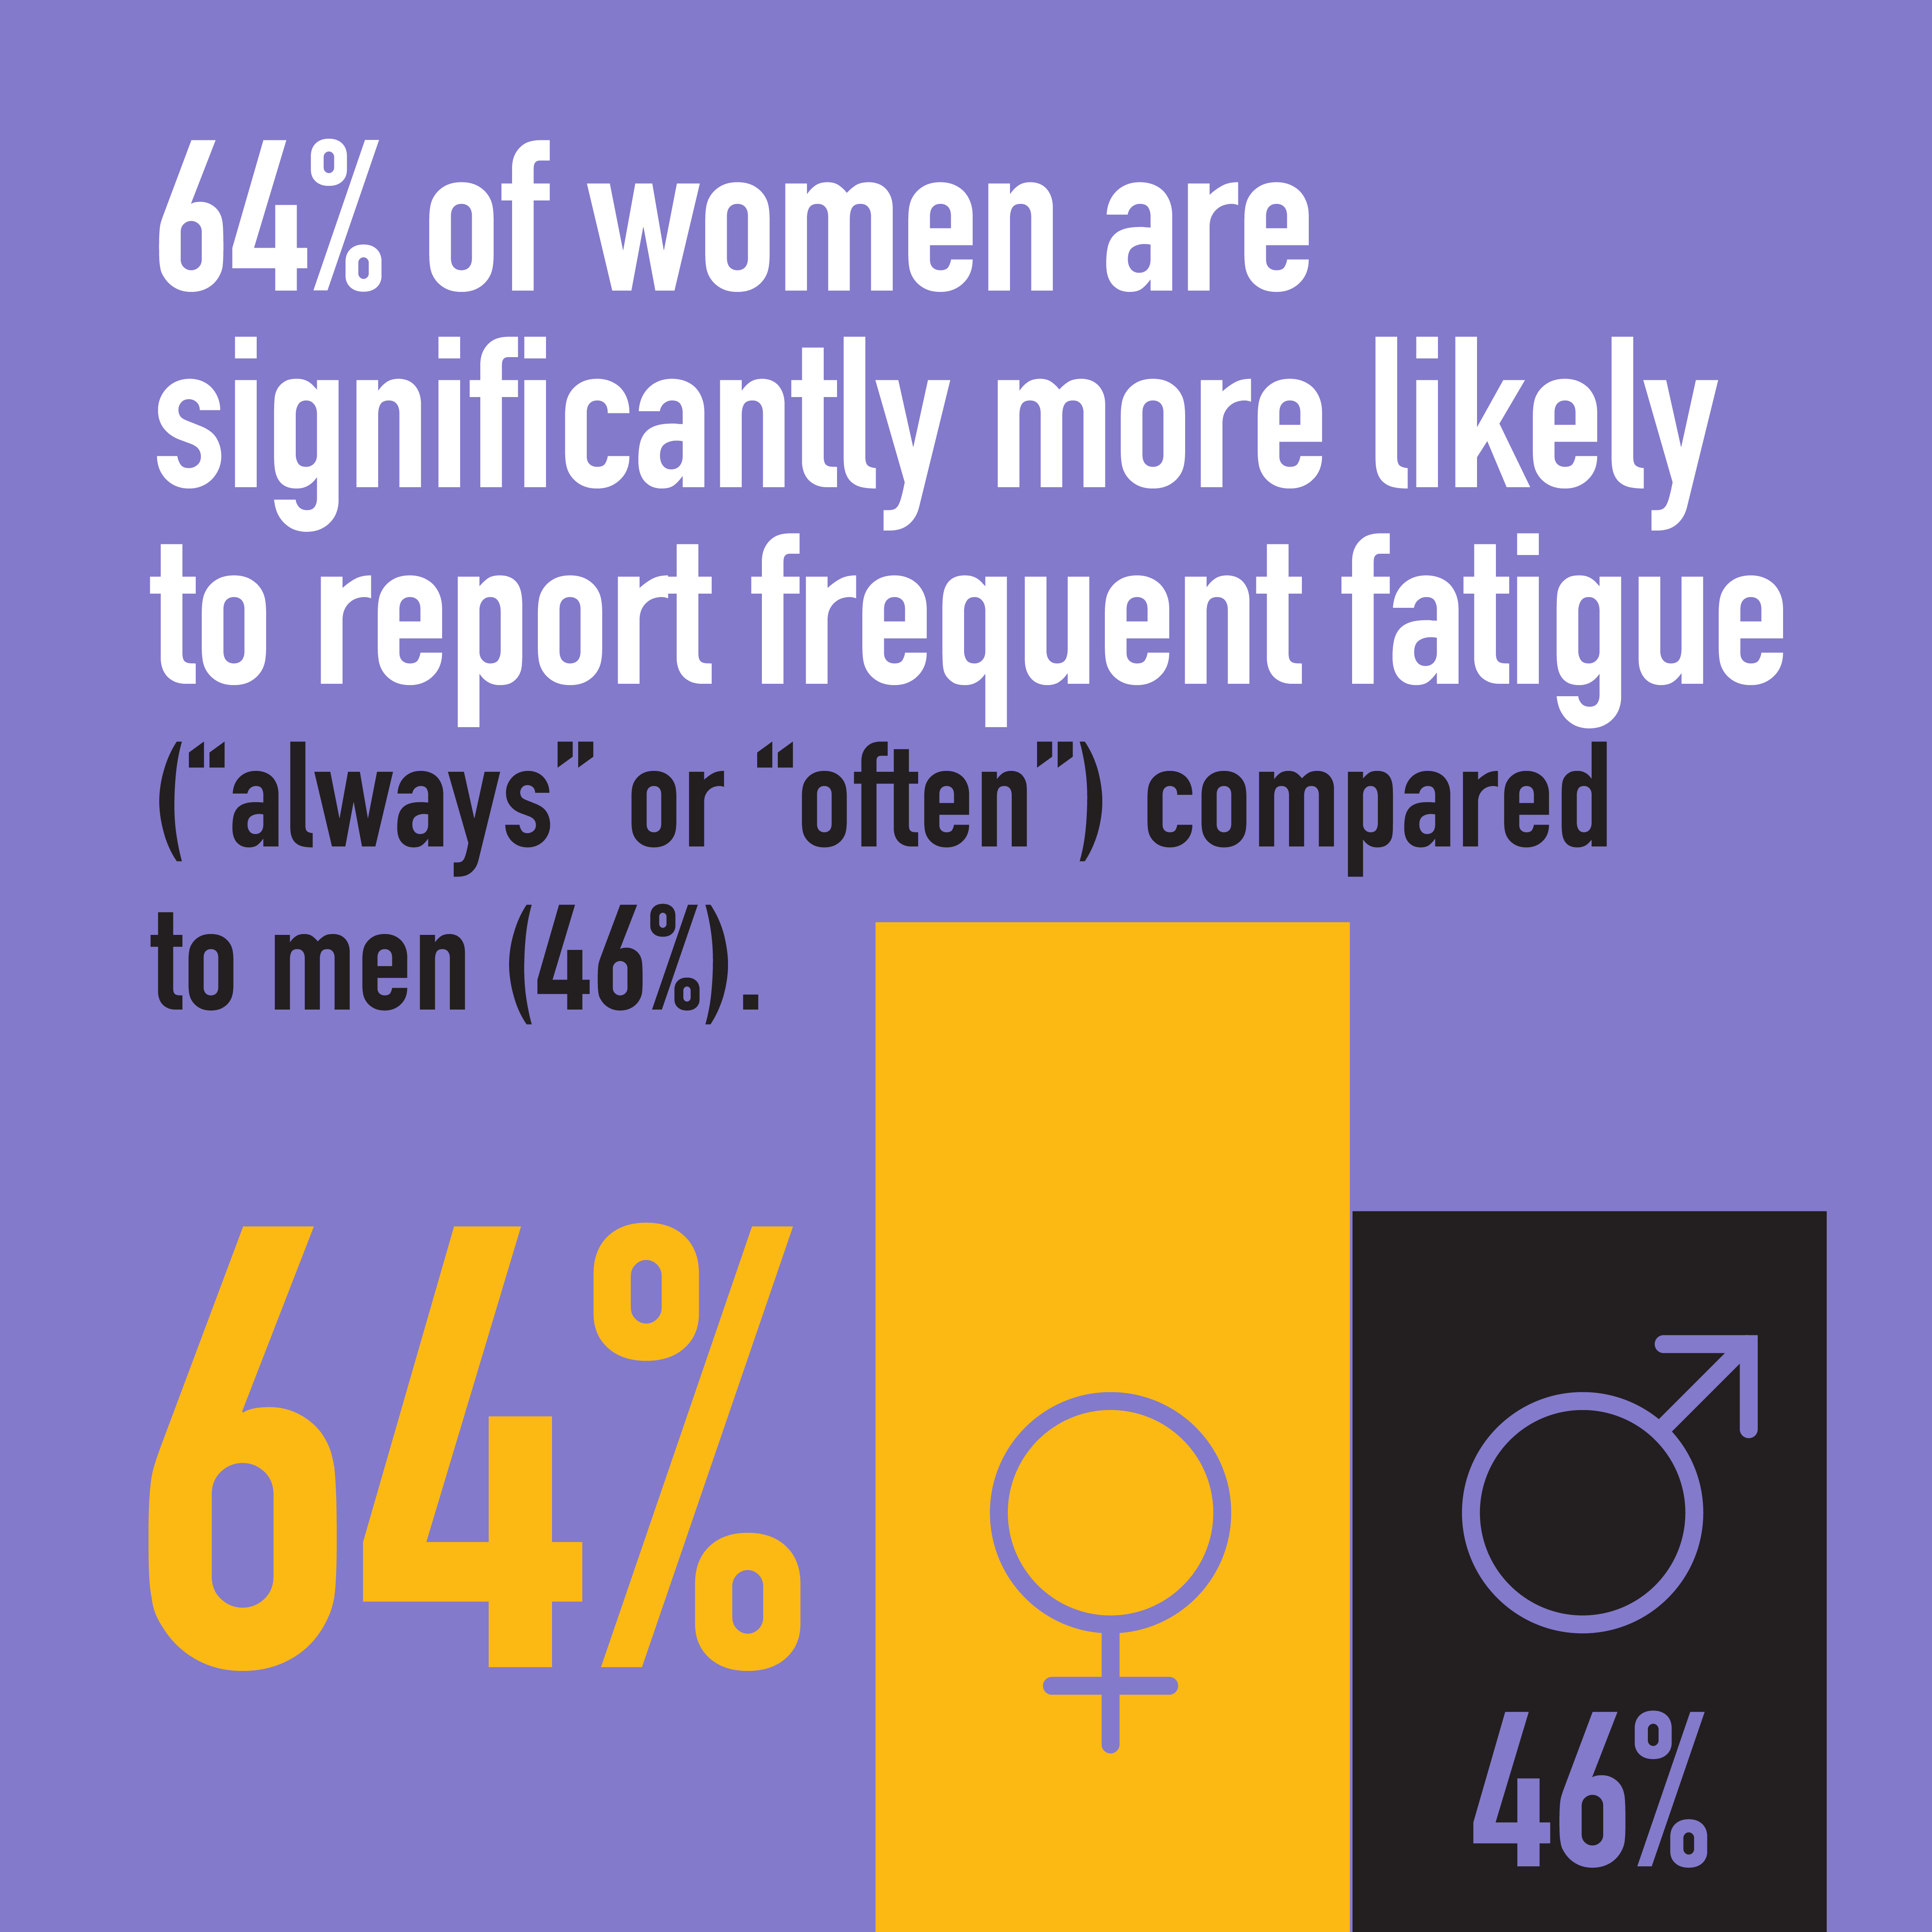 64% of women are significantly more likely to report frequent fatigue (always or often) compared to men (46%)